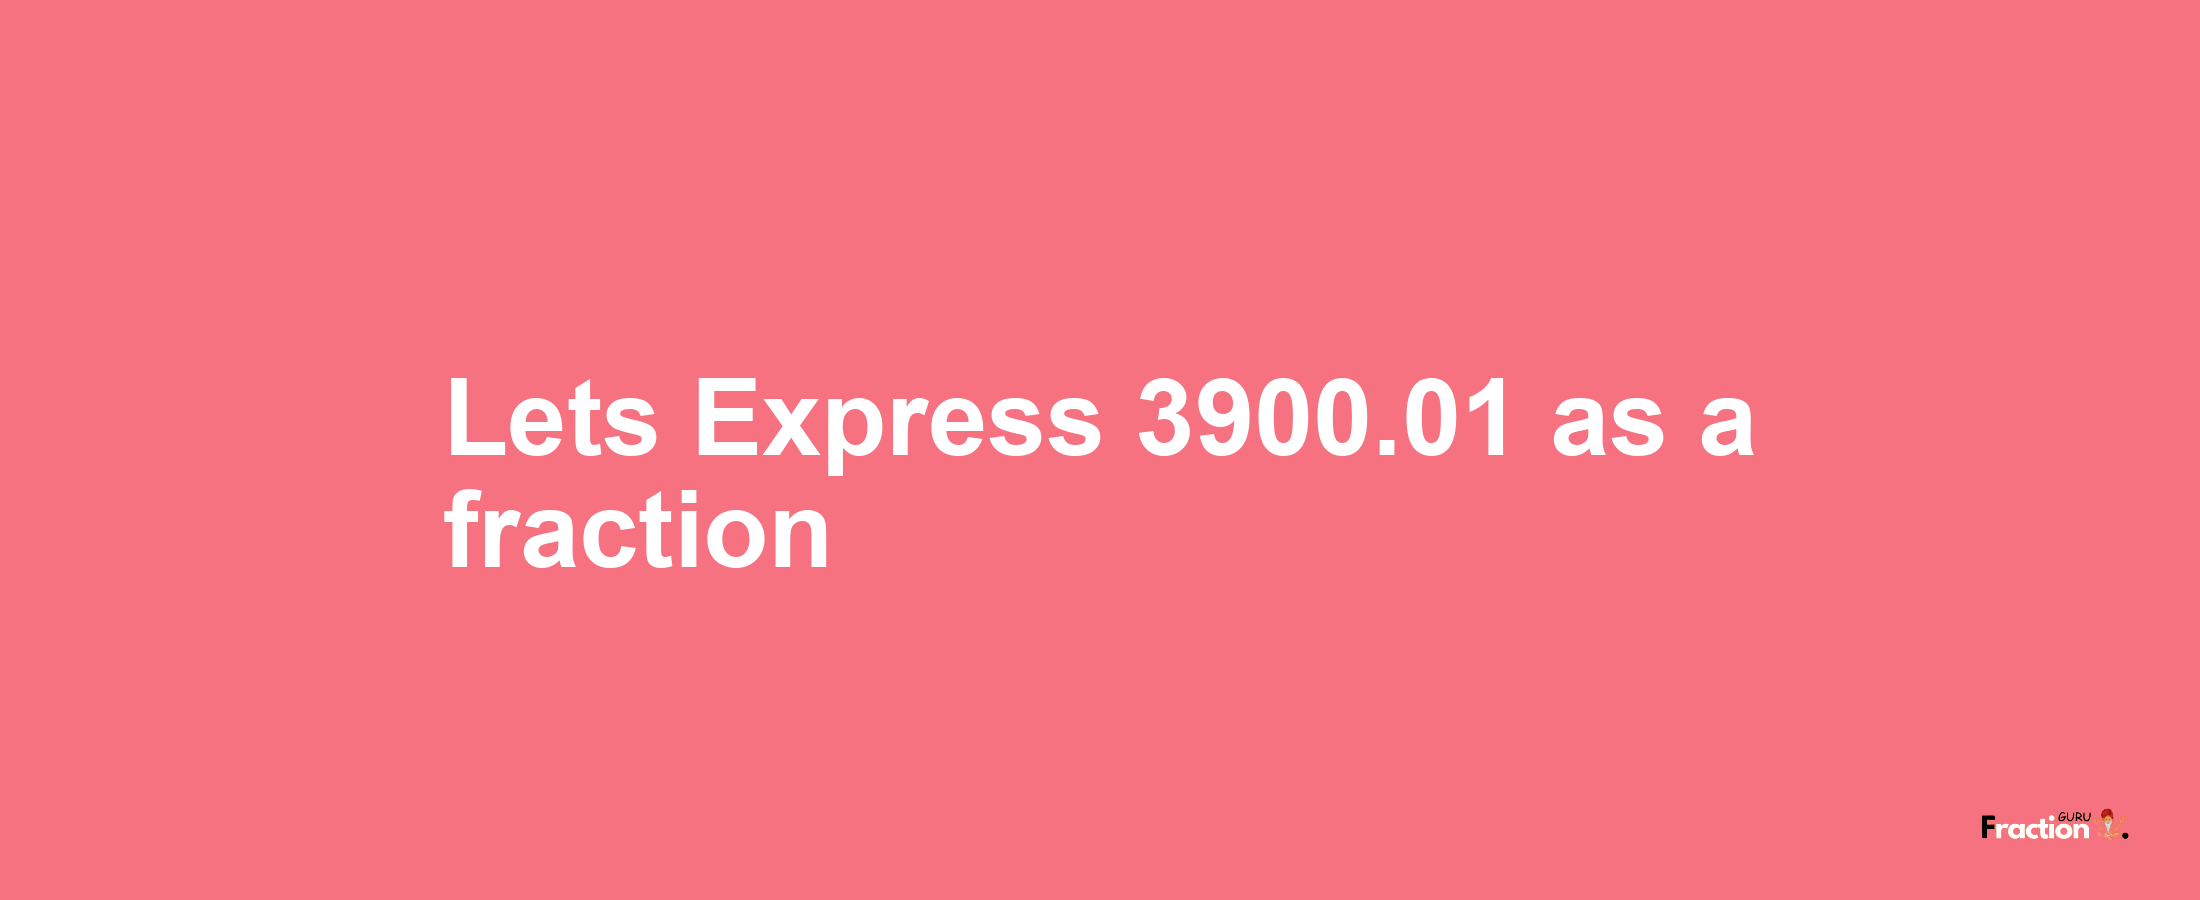 Lets Express 3900.01 as afraction